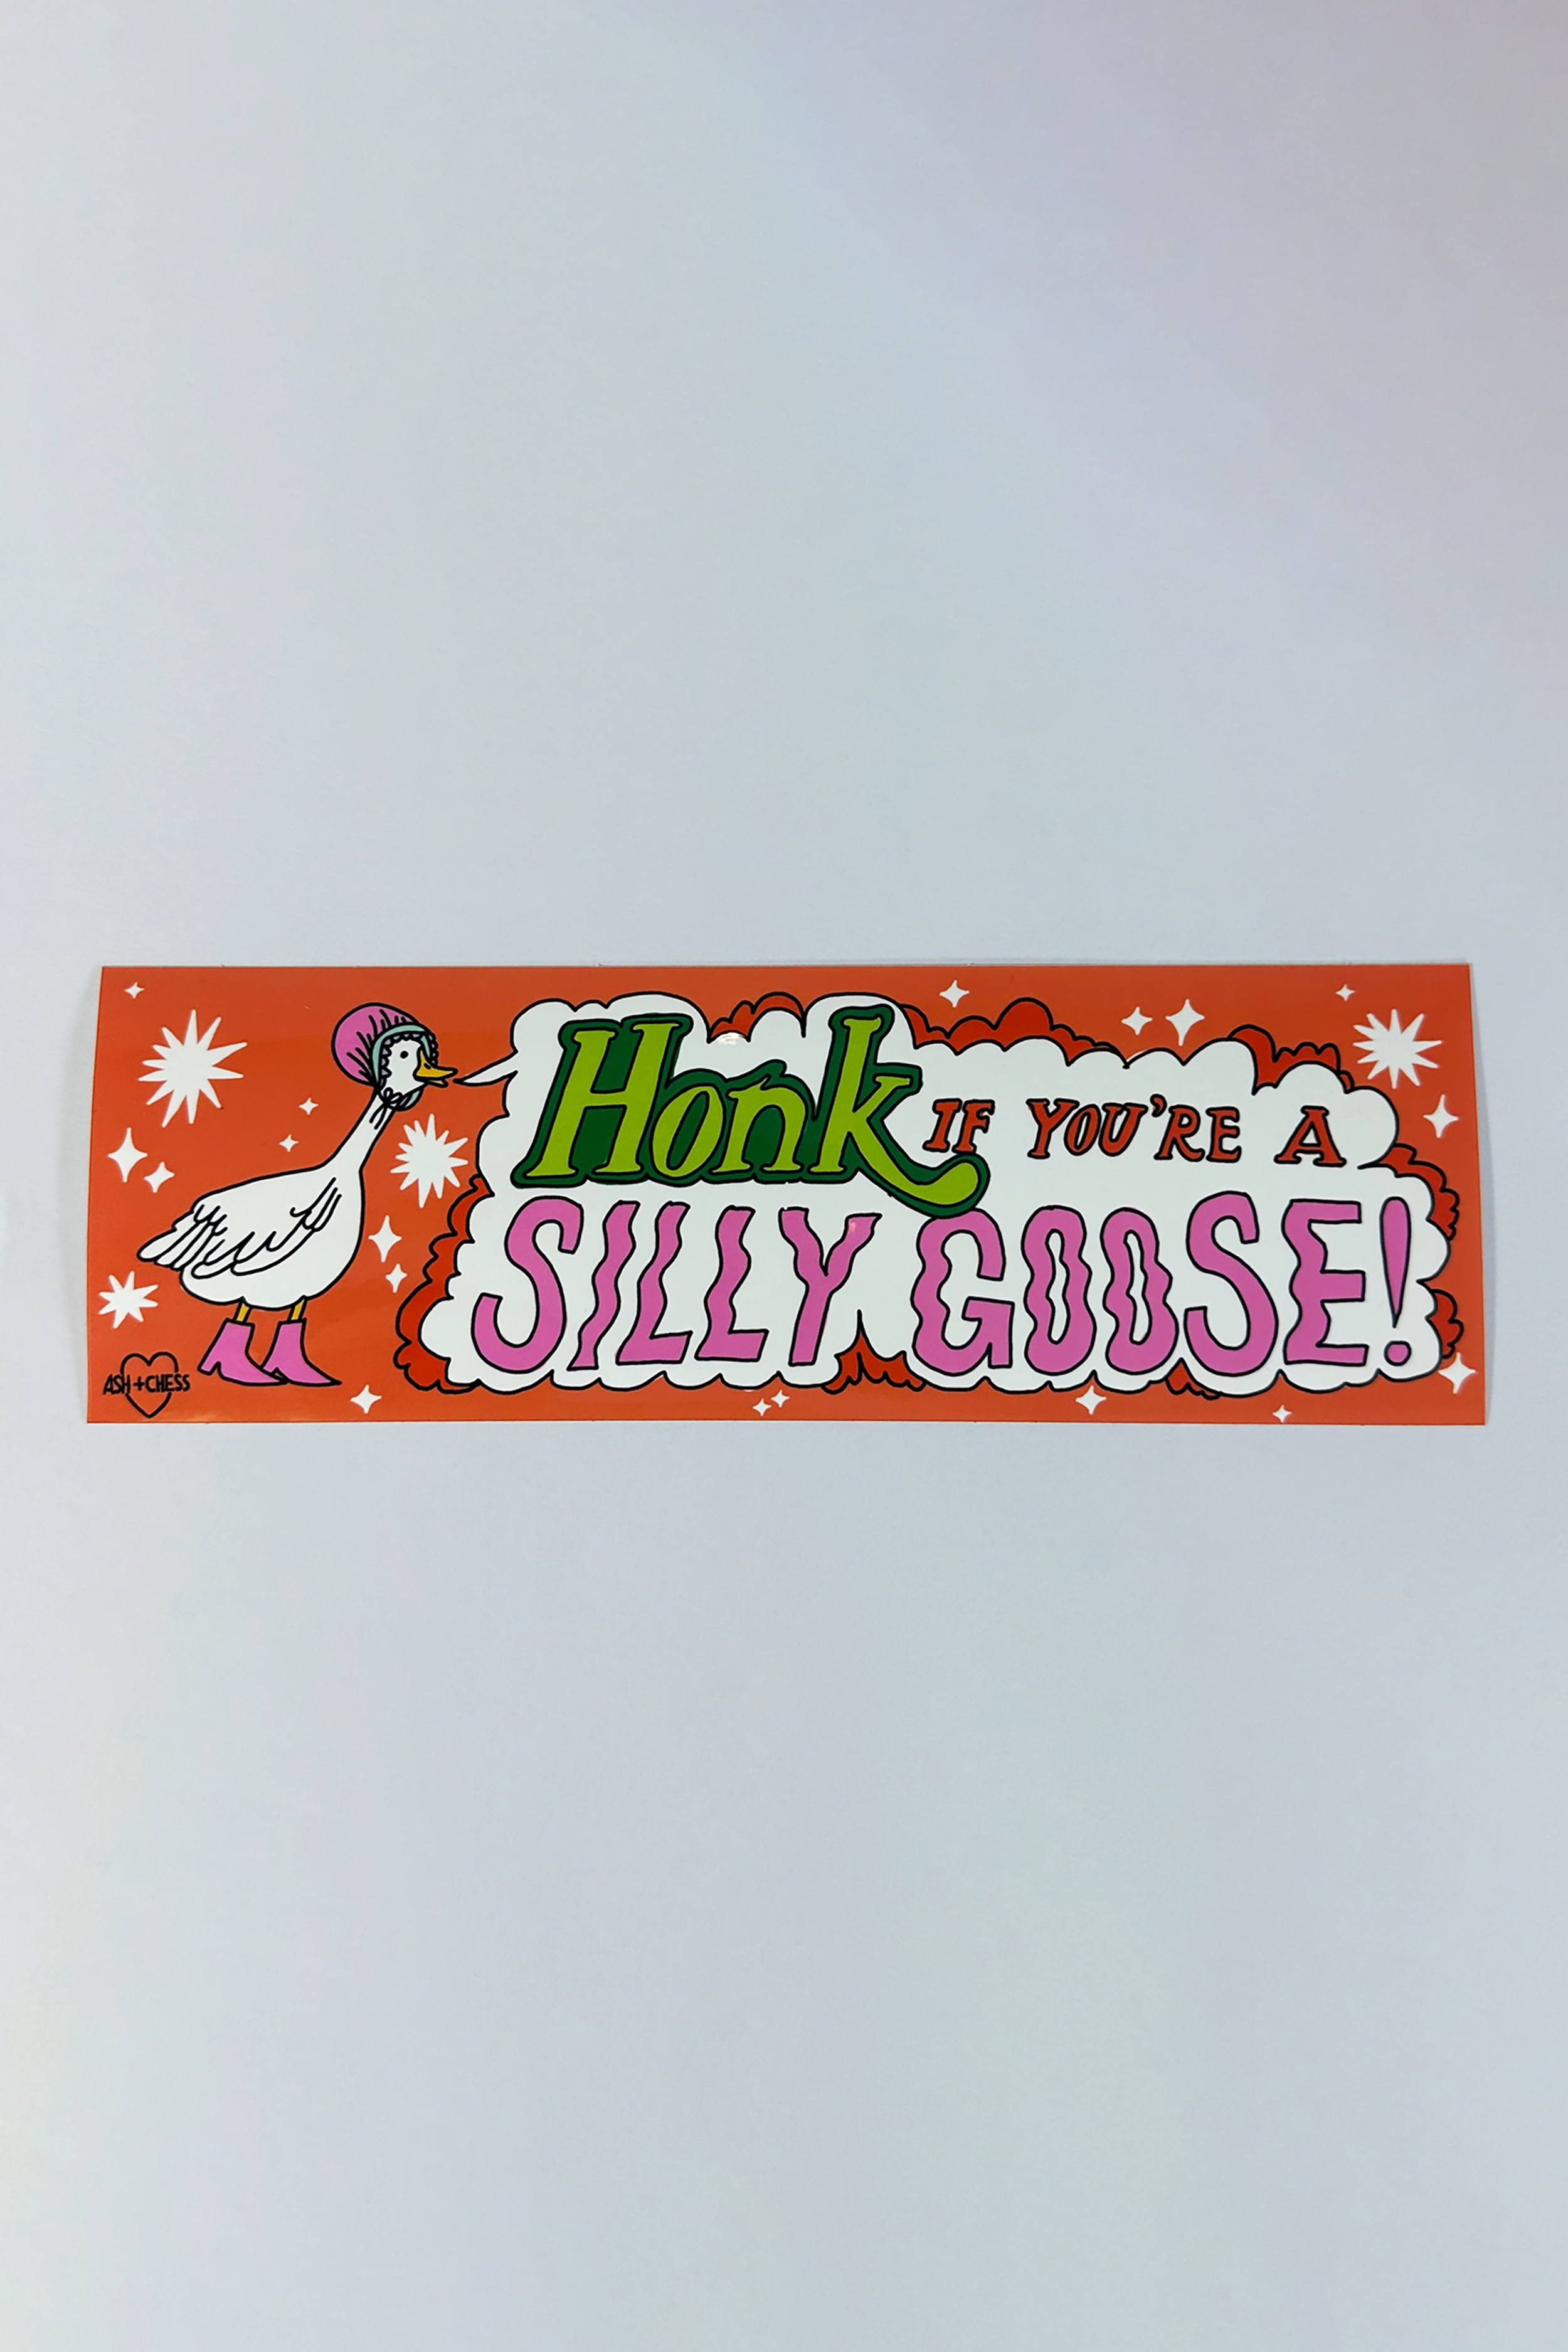 Honk If You're a Silly Goose Bumper Sticker